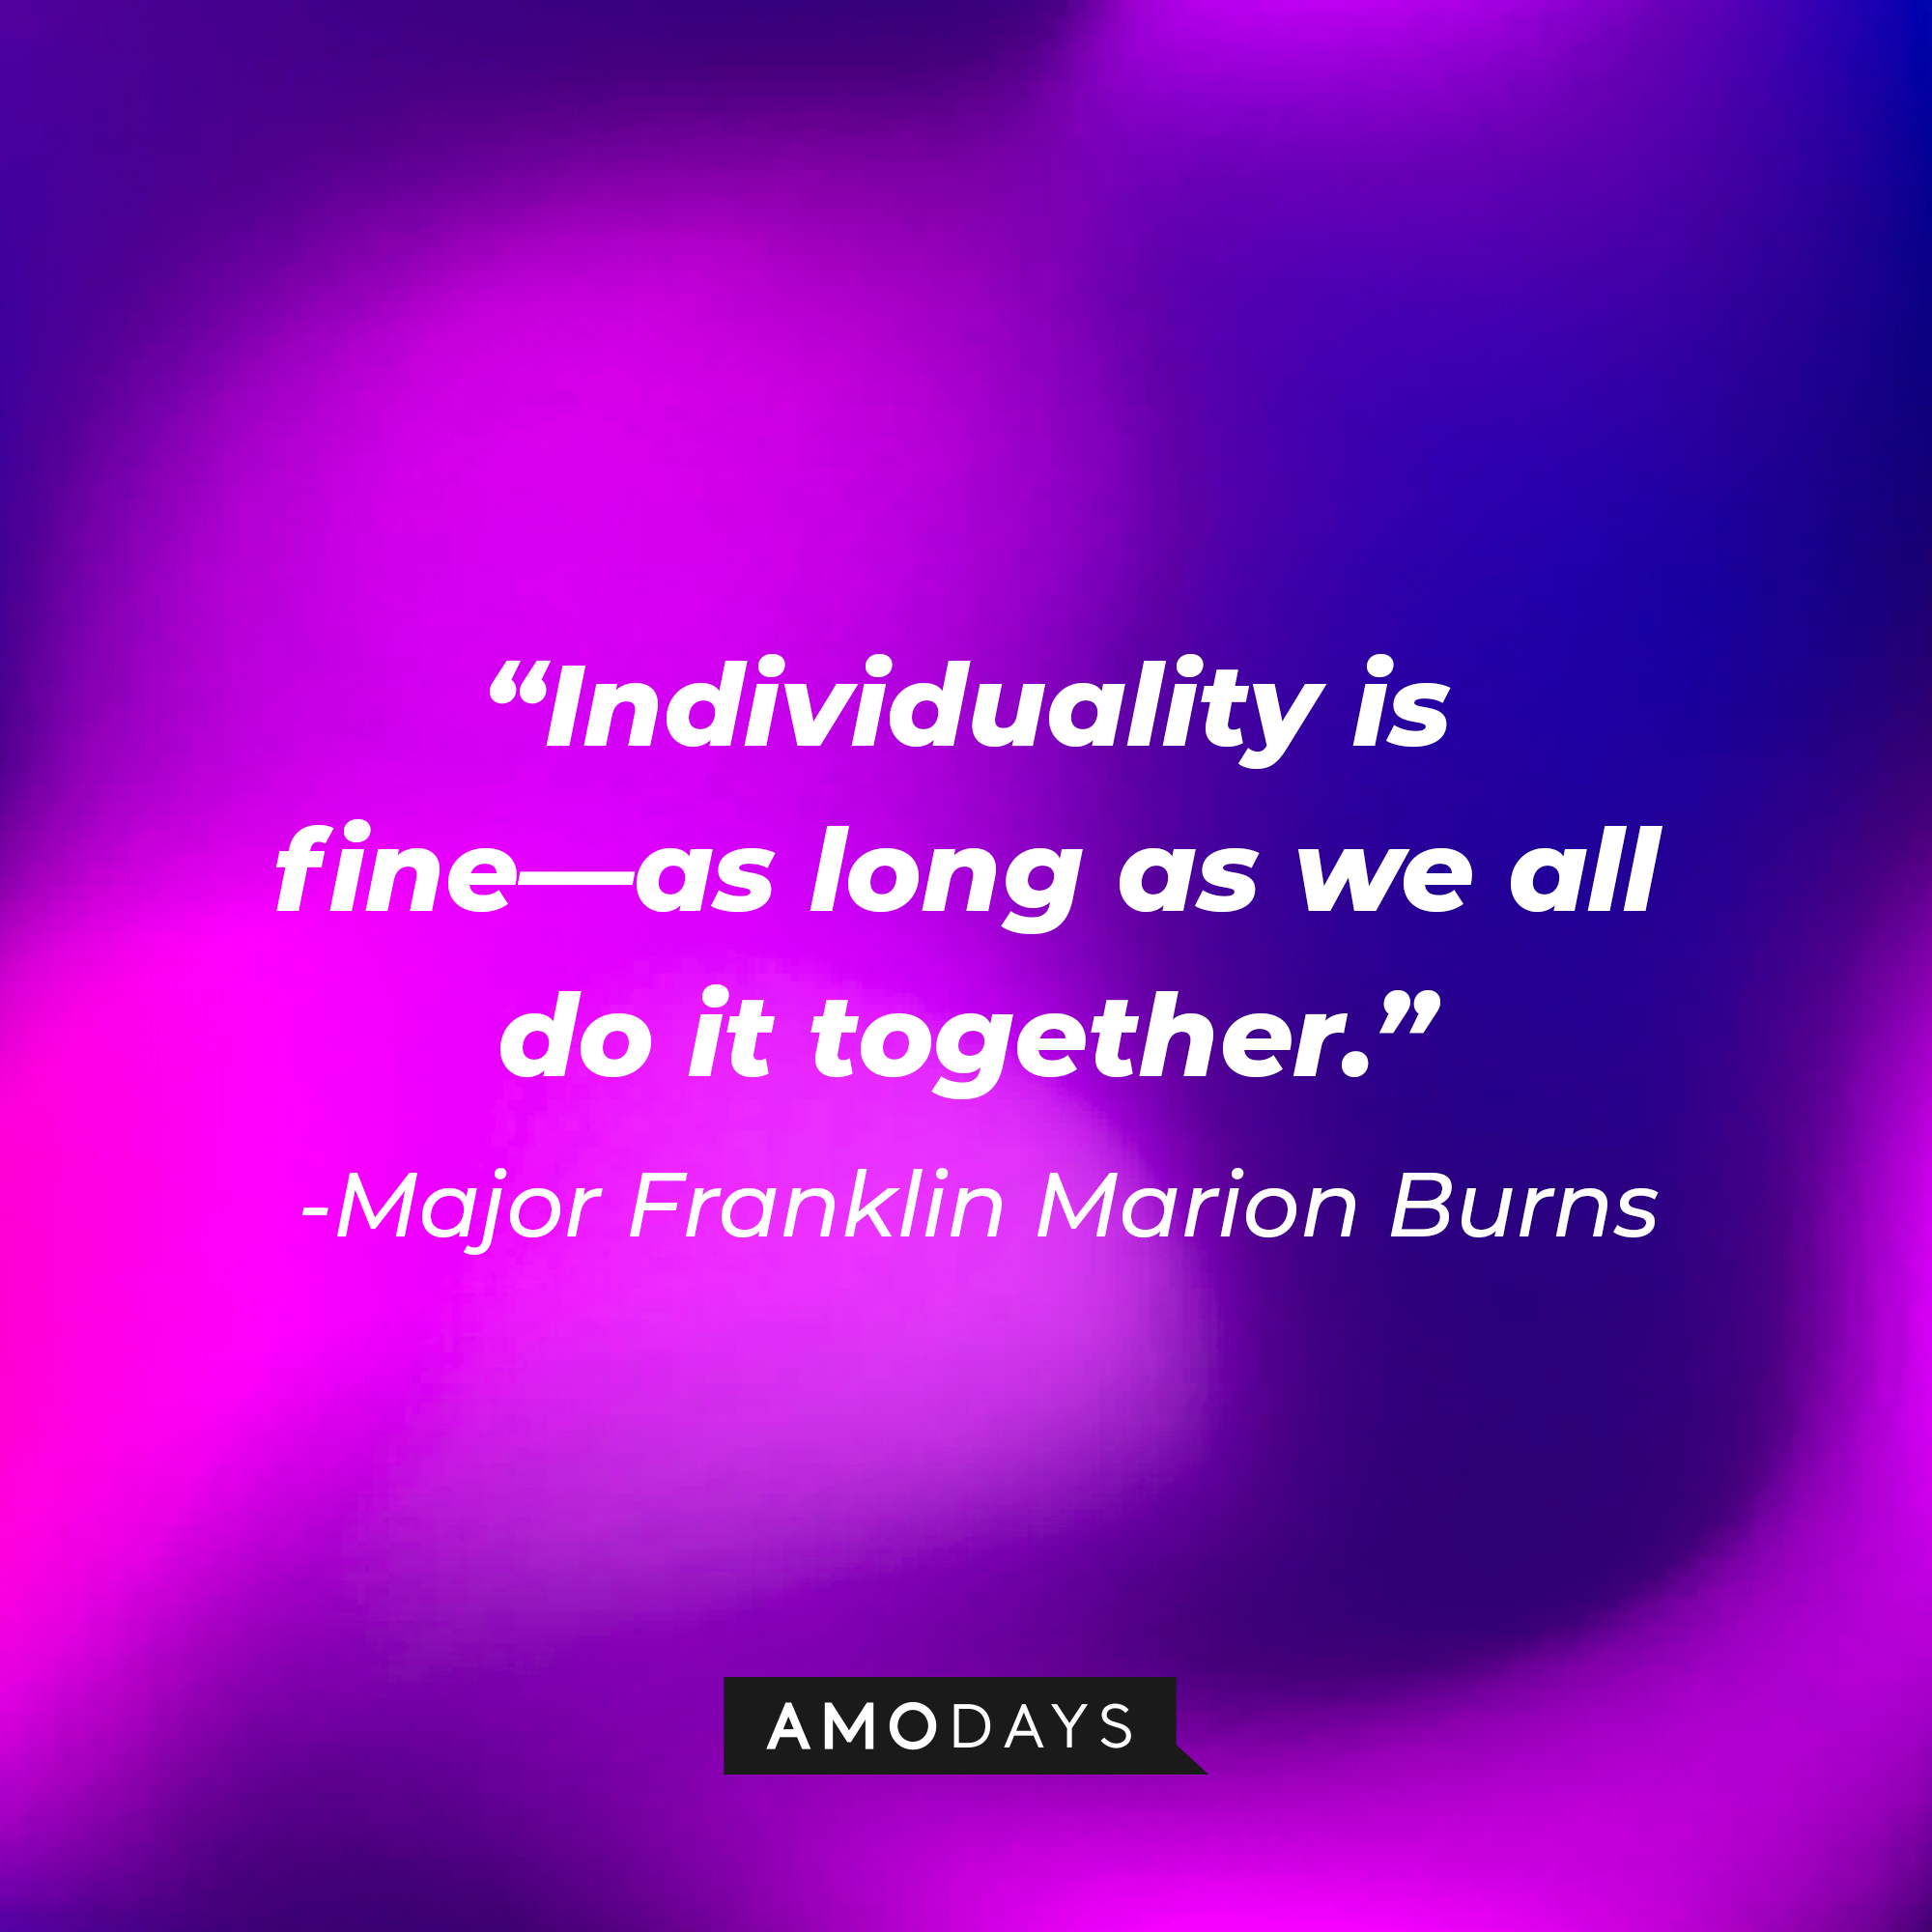 Major Franklin Marion Burn’s quote: “Individuality is fine—as long as we all do it together.” | Source: AmoDays